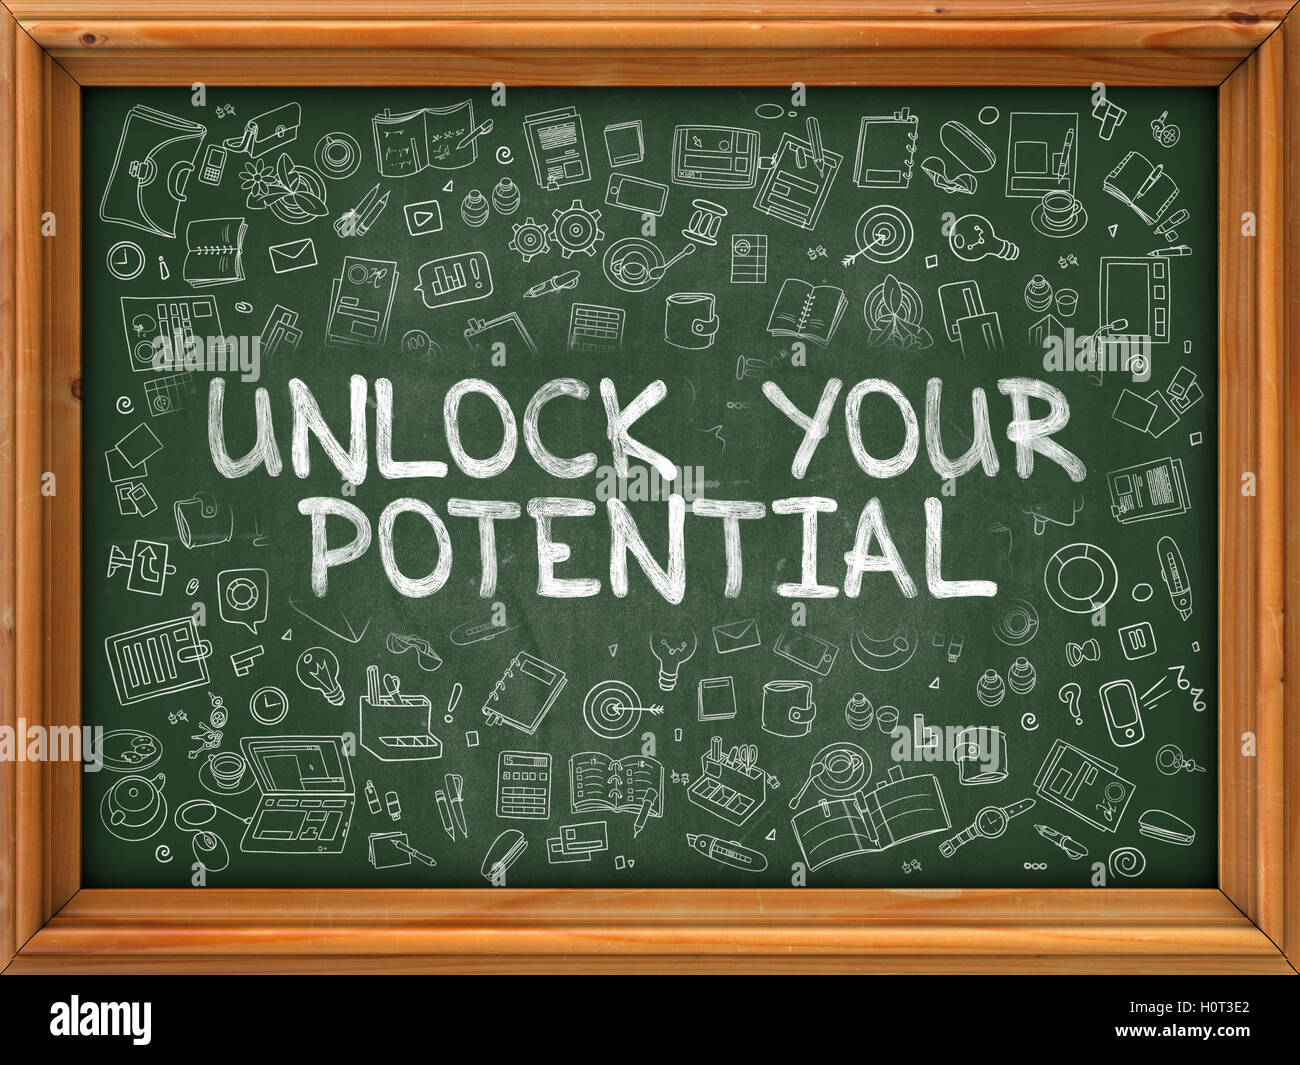 Hand Drawn Unlock Your Potential on Green Chalkboard. Stock Photo